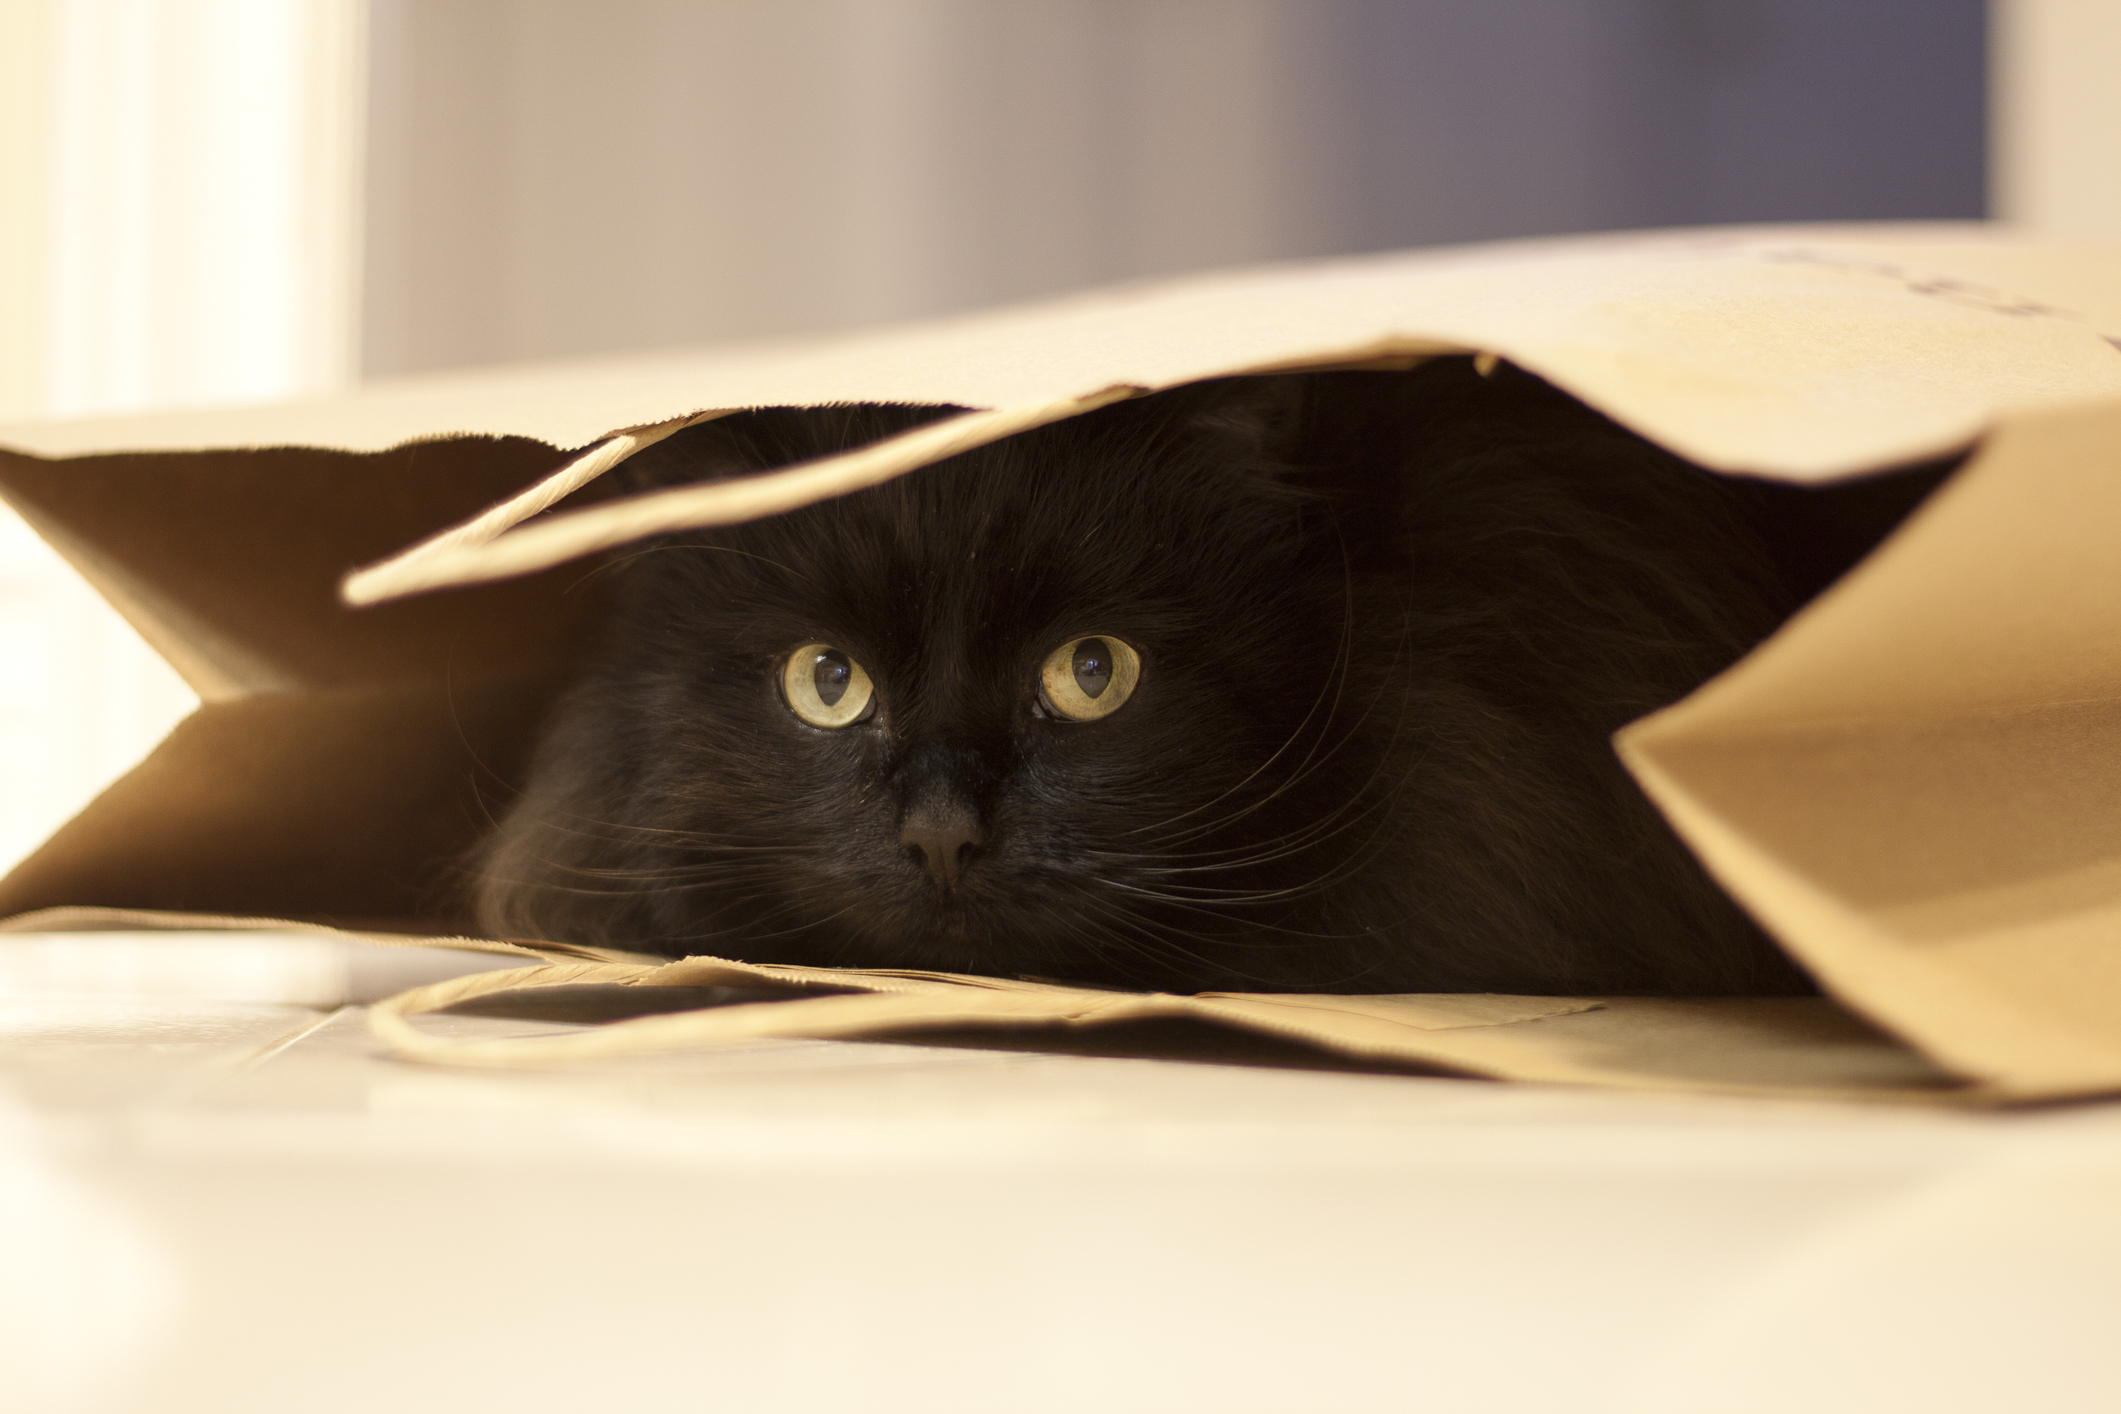 Black cat hiding in paper shopping bag with green eyes and whiskers peeking out.